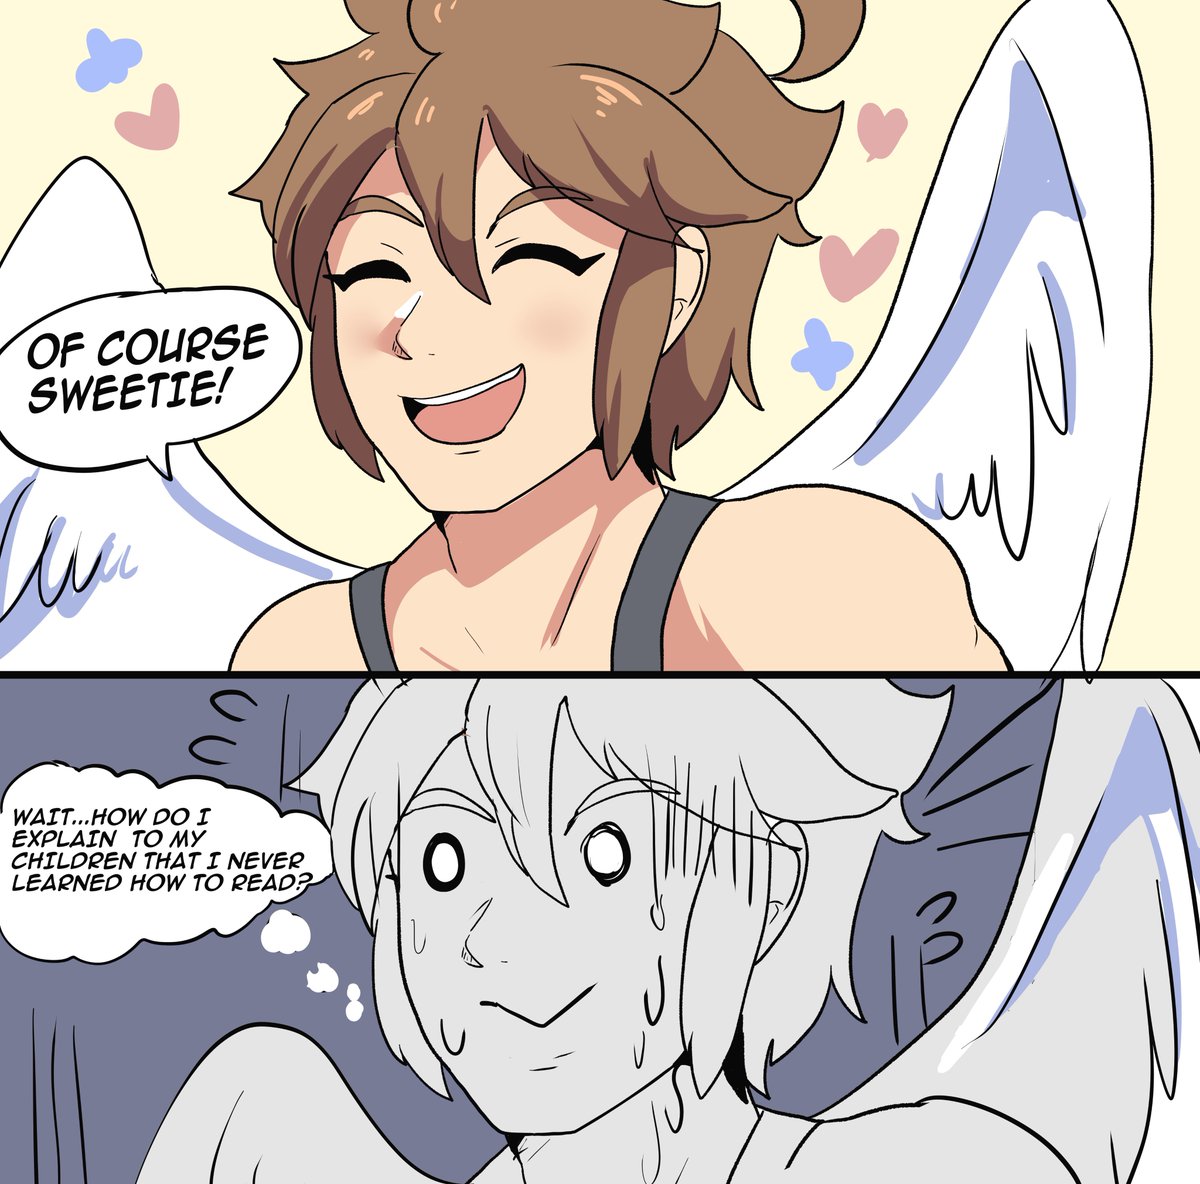 Pit being dad in the future
#KidIcarus #Nintendo 